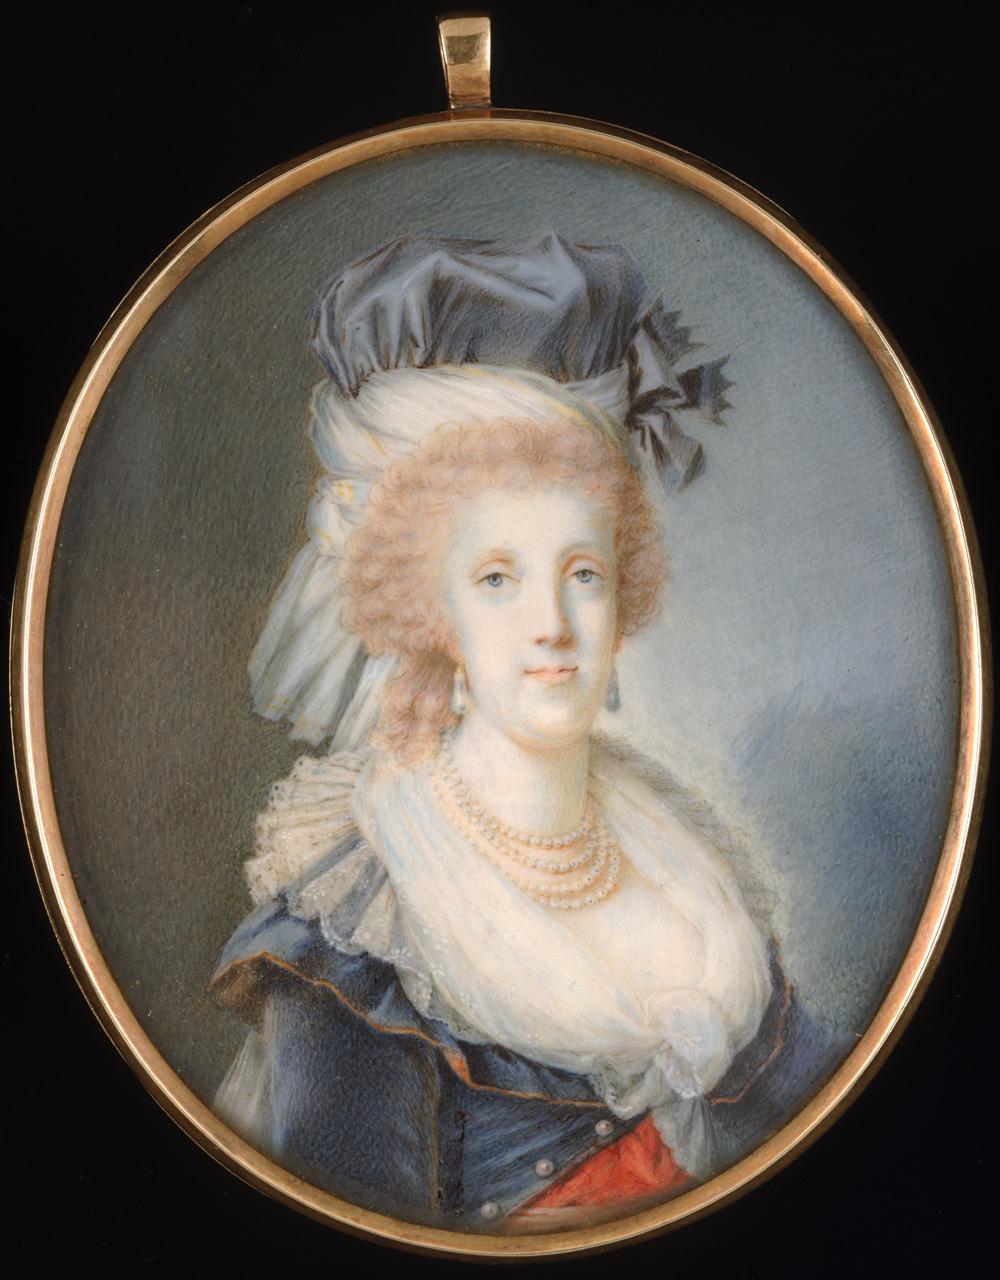 Miniature of Maria Carolina, Queen of Naples and Sicily, c. 1780-90, unknown artist